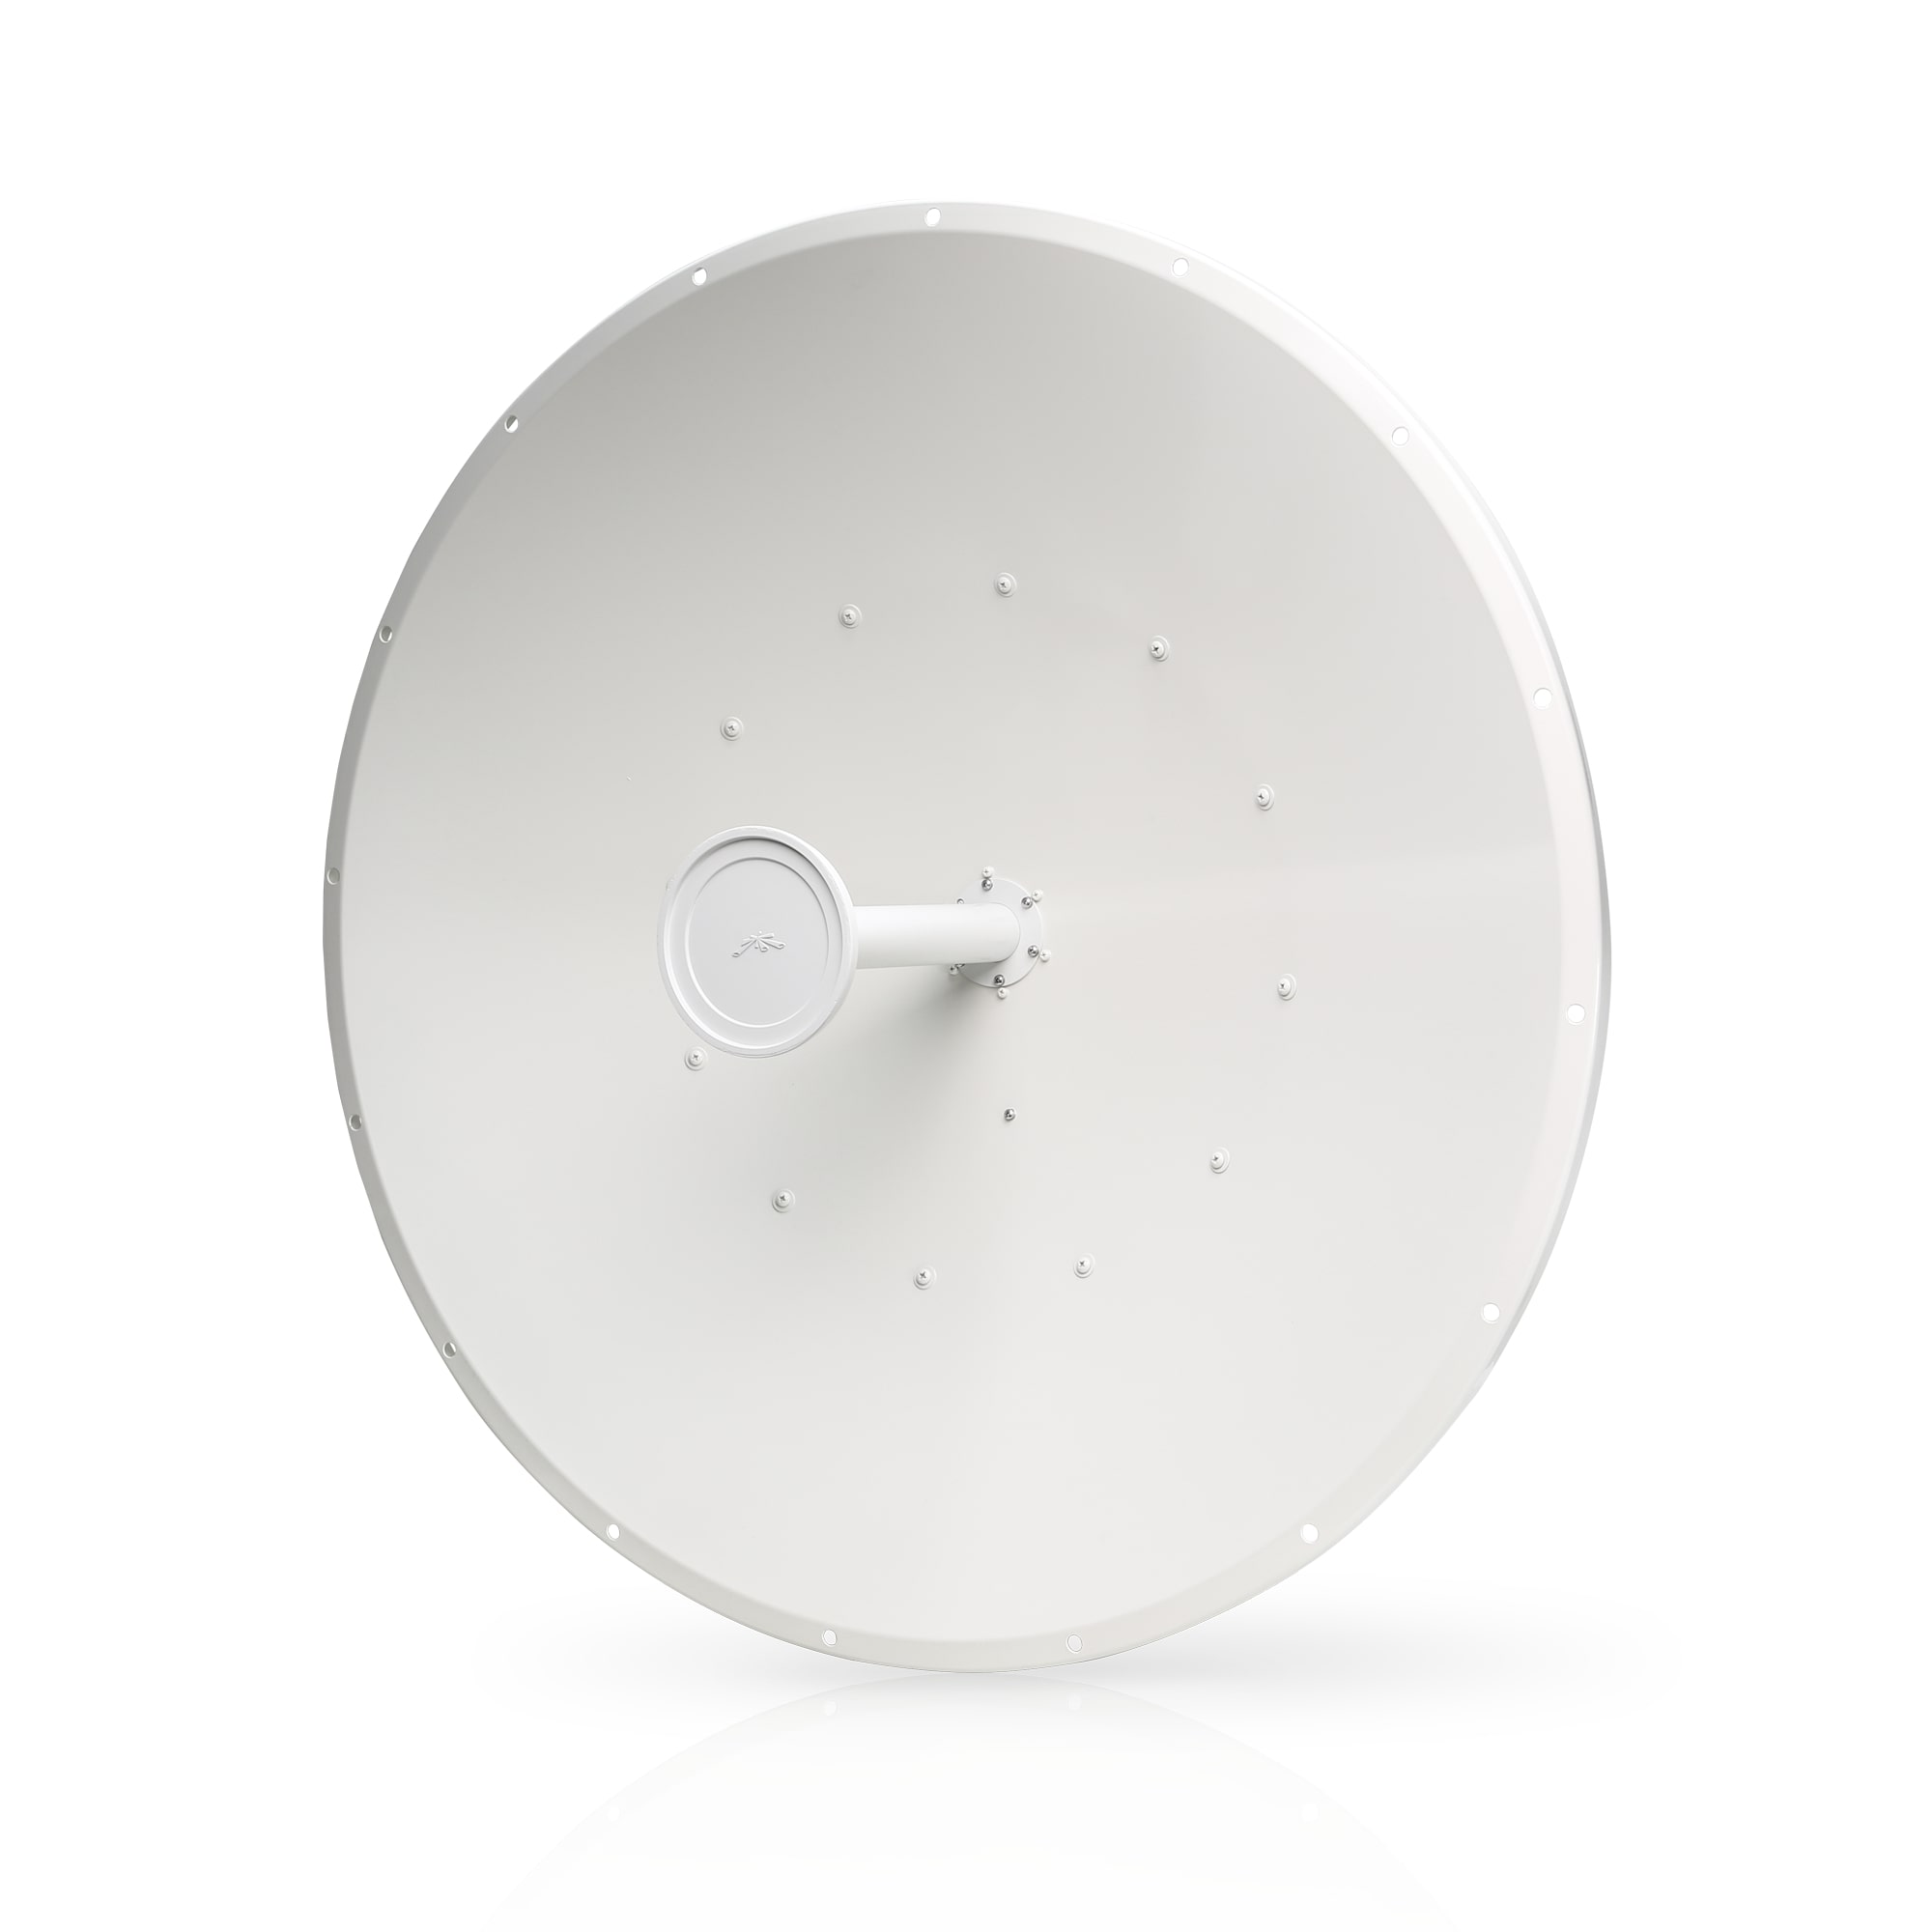 Ubiquiti 5GHz airFiber Dish 34dBi Slant 45 Degree Signal Angle for Optimum Interference Avoidance, Universal Pole Mount, Weatherproof, Incl 2Yr Warr AF-5G34-S45